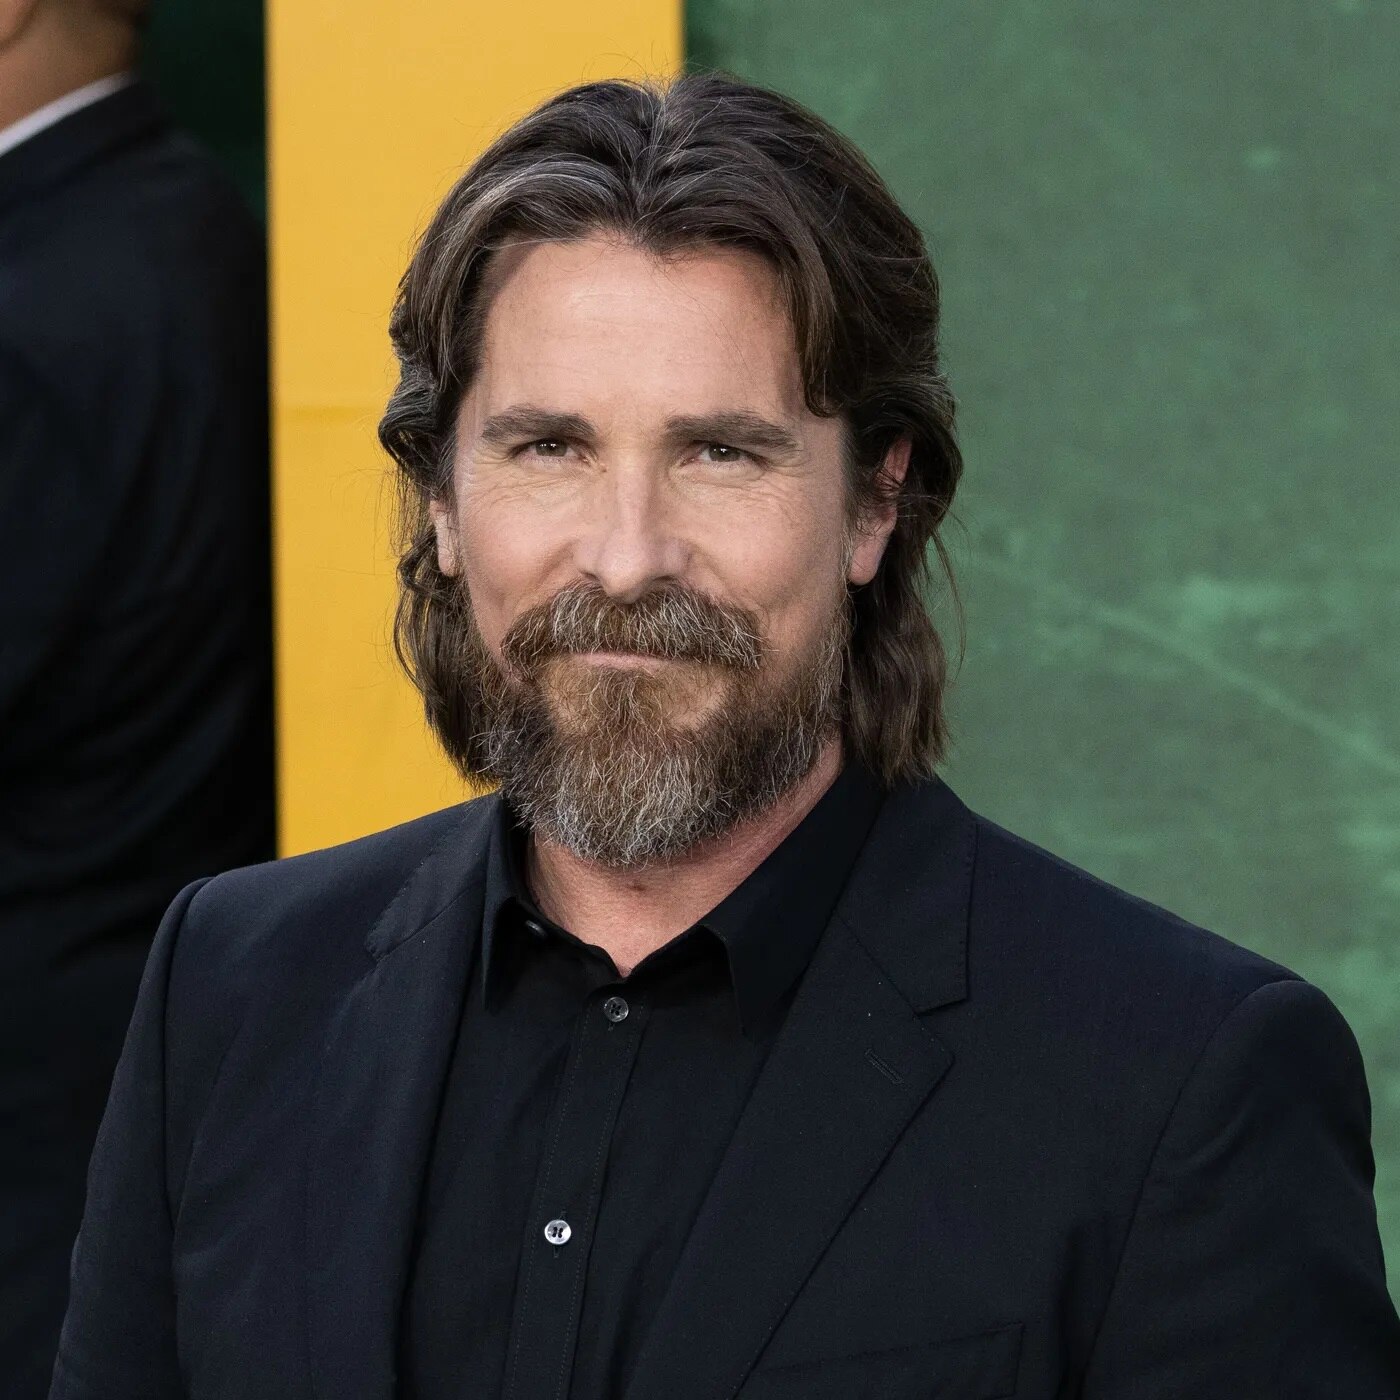 christian-bale-celebrates-50th-birthday-in-cabo-flaunts-ripped-physique